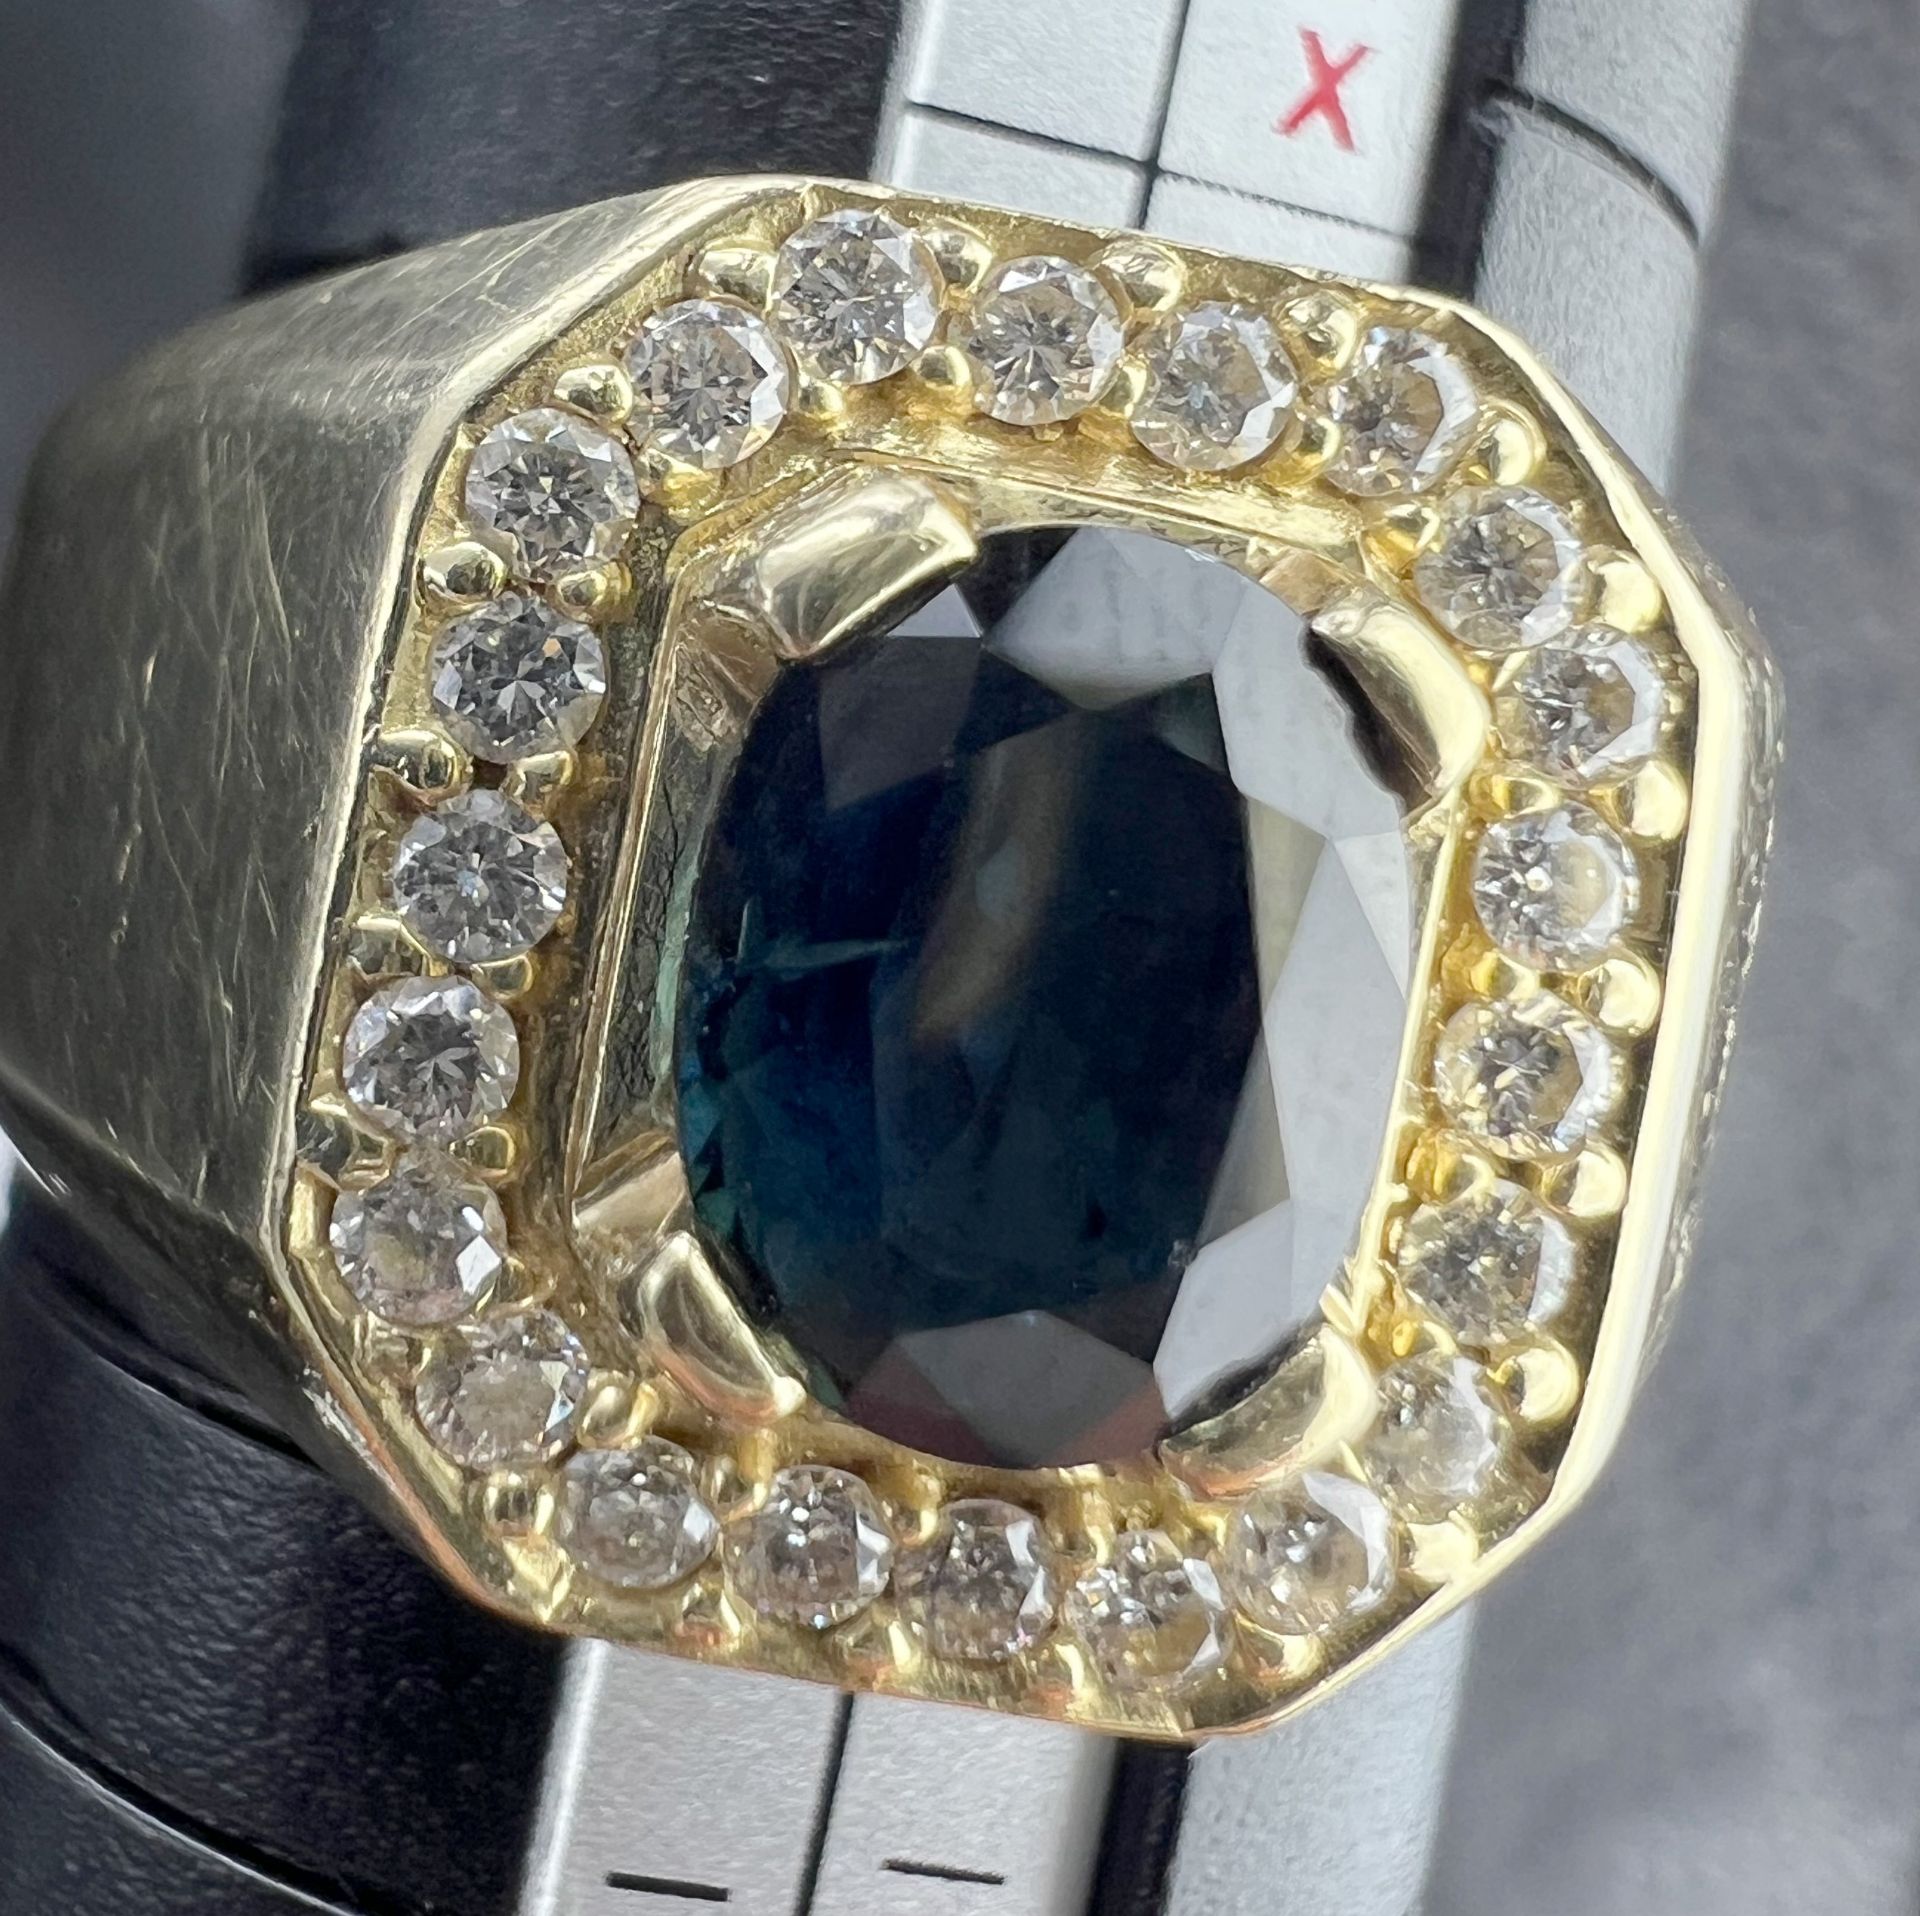 Ladies ring. 585 yellow gold. 1 blue coloured stone and diamonds. - Image 7 of 8